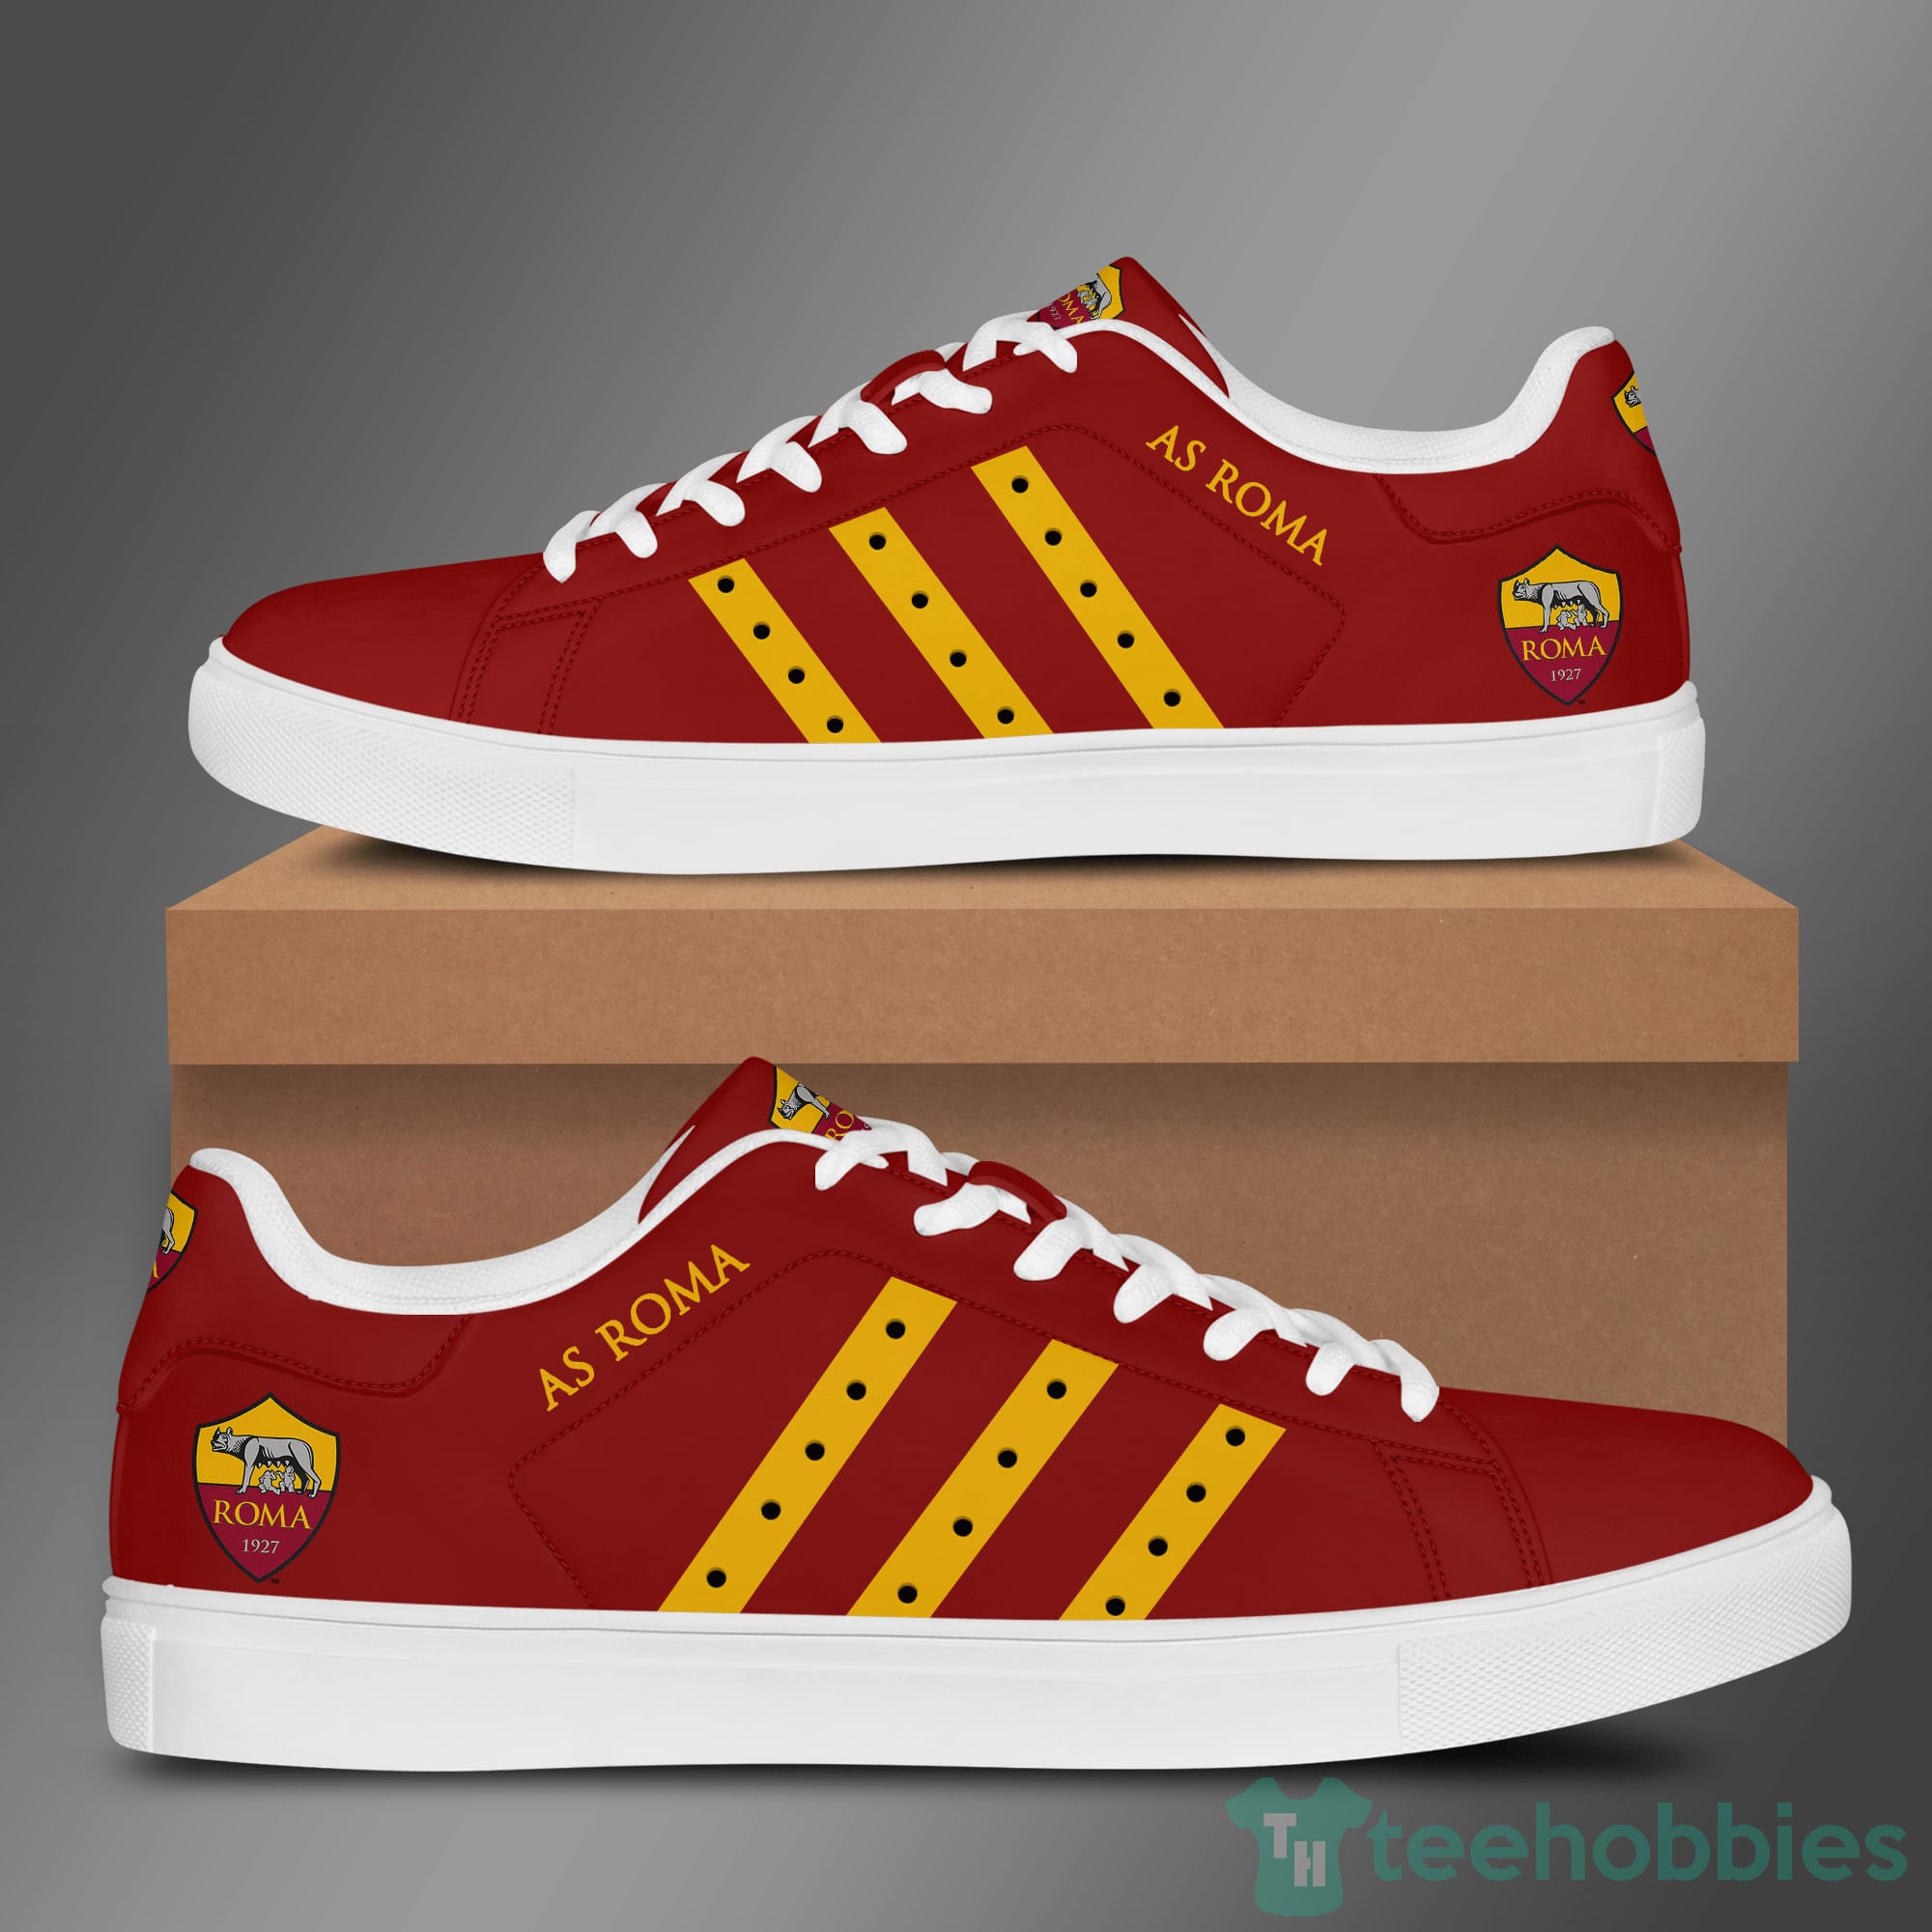 As Roma Yellow Striped Red Low Top Skate Shoes Product photo 1